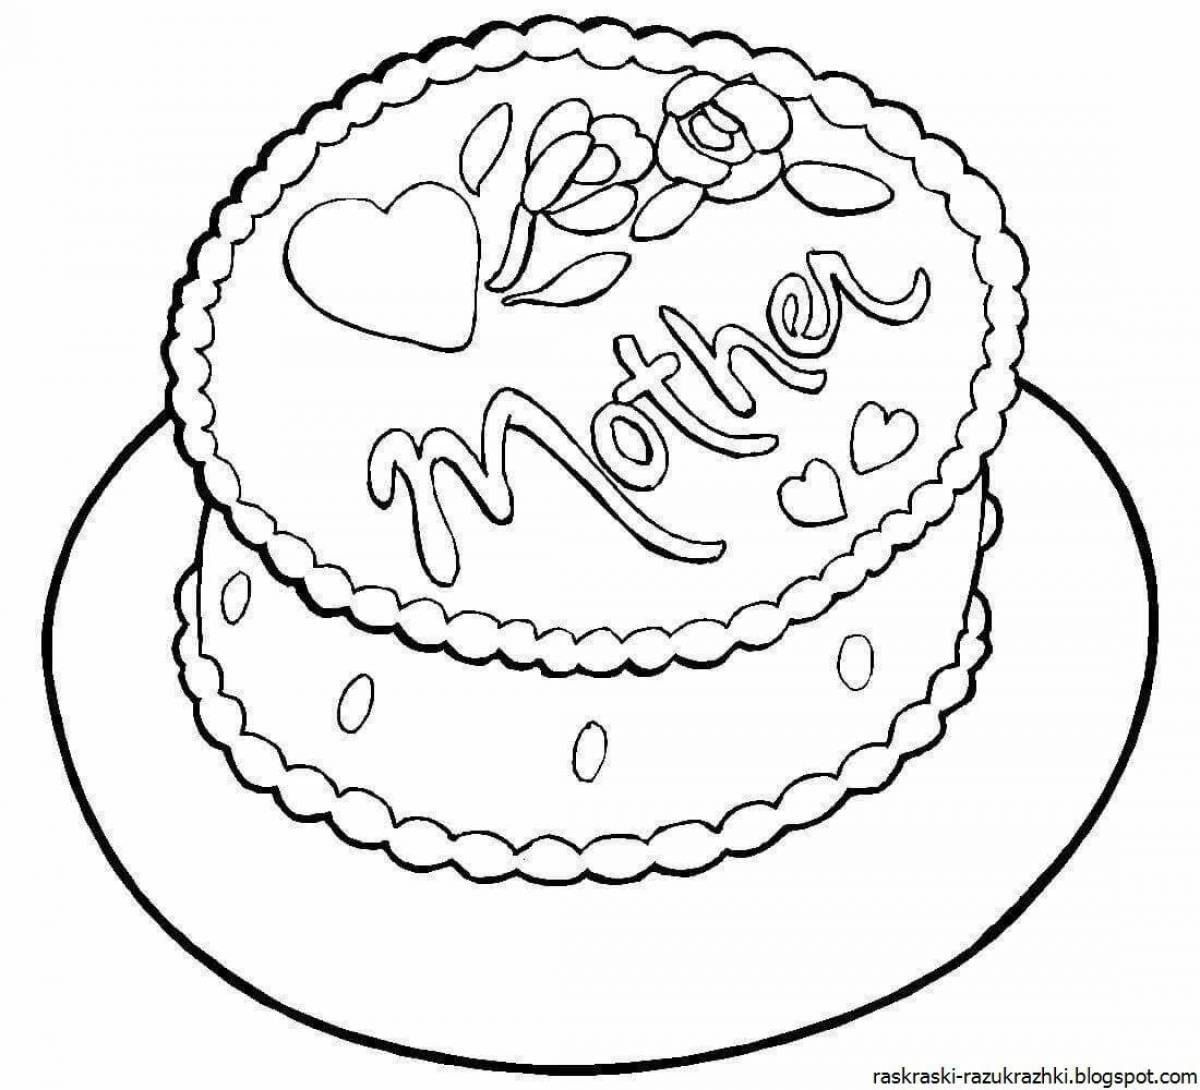 Fancy cakes coloring book for kids